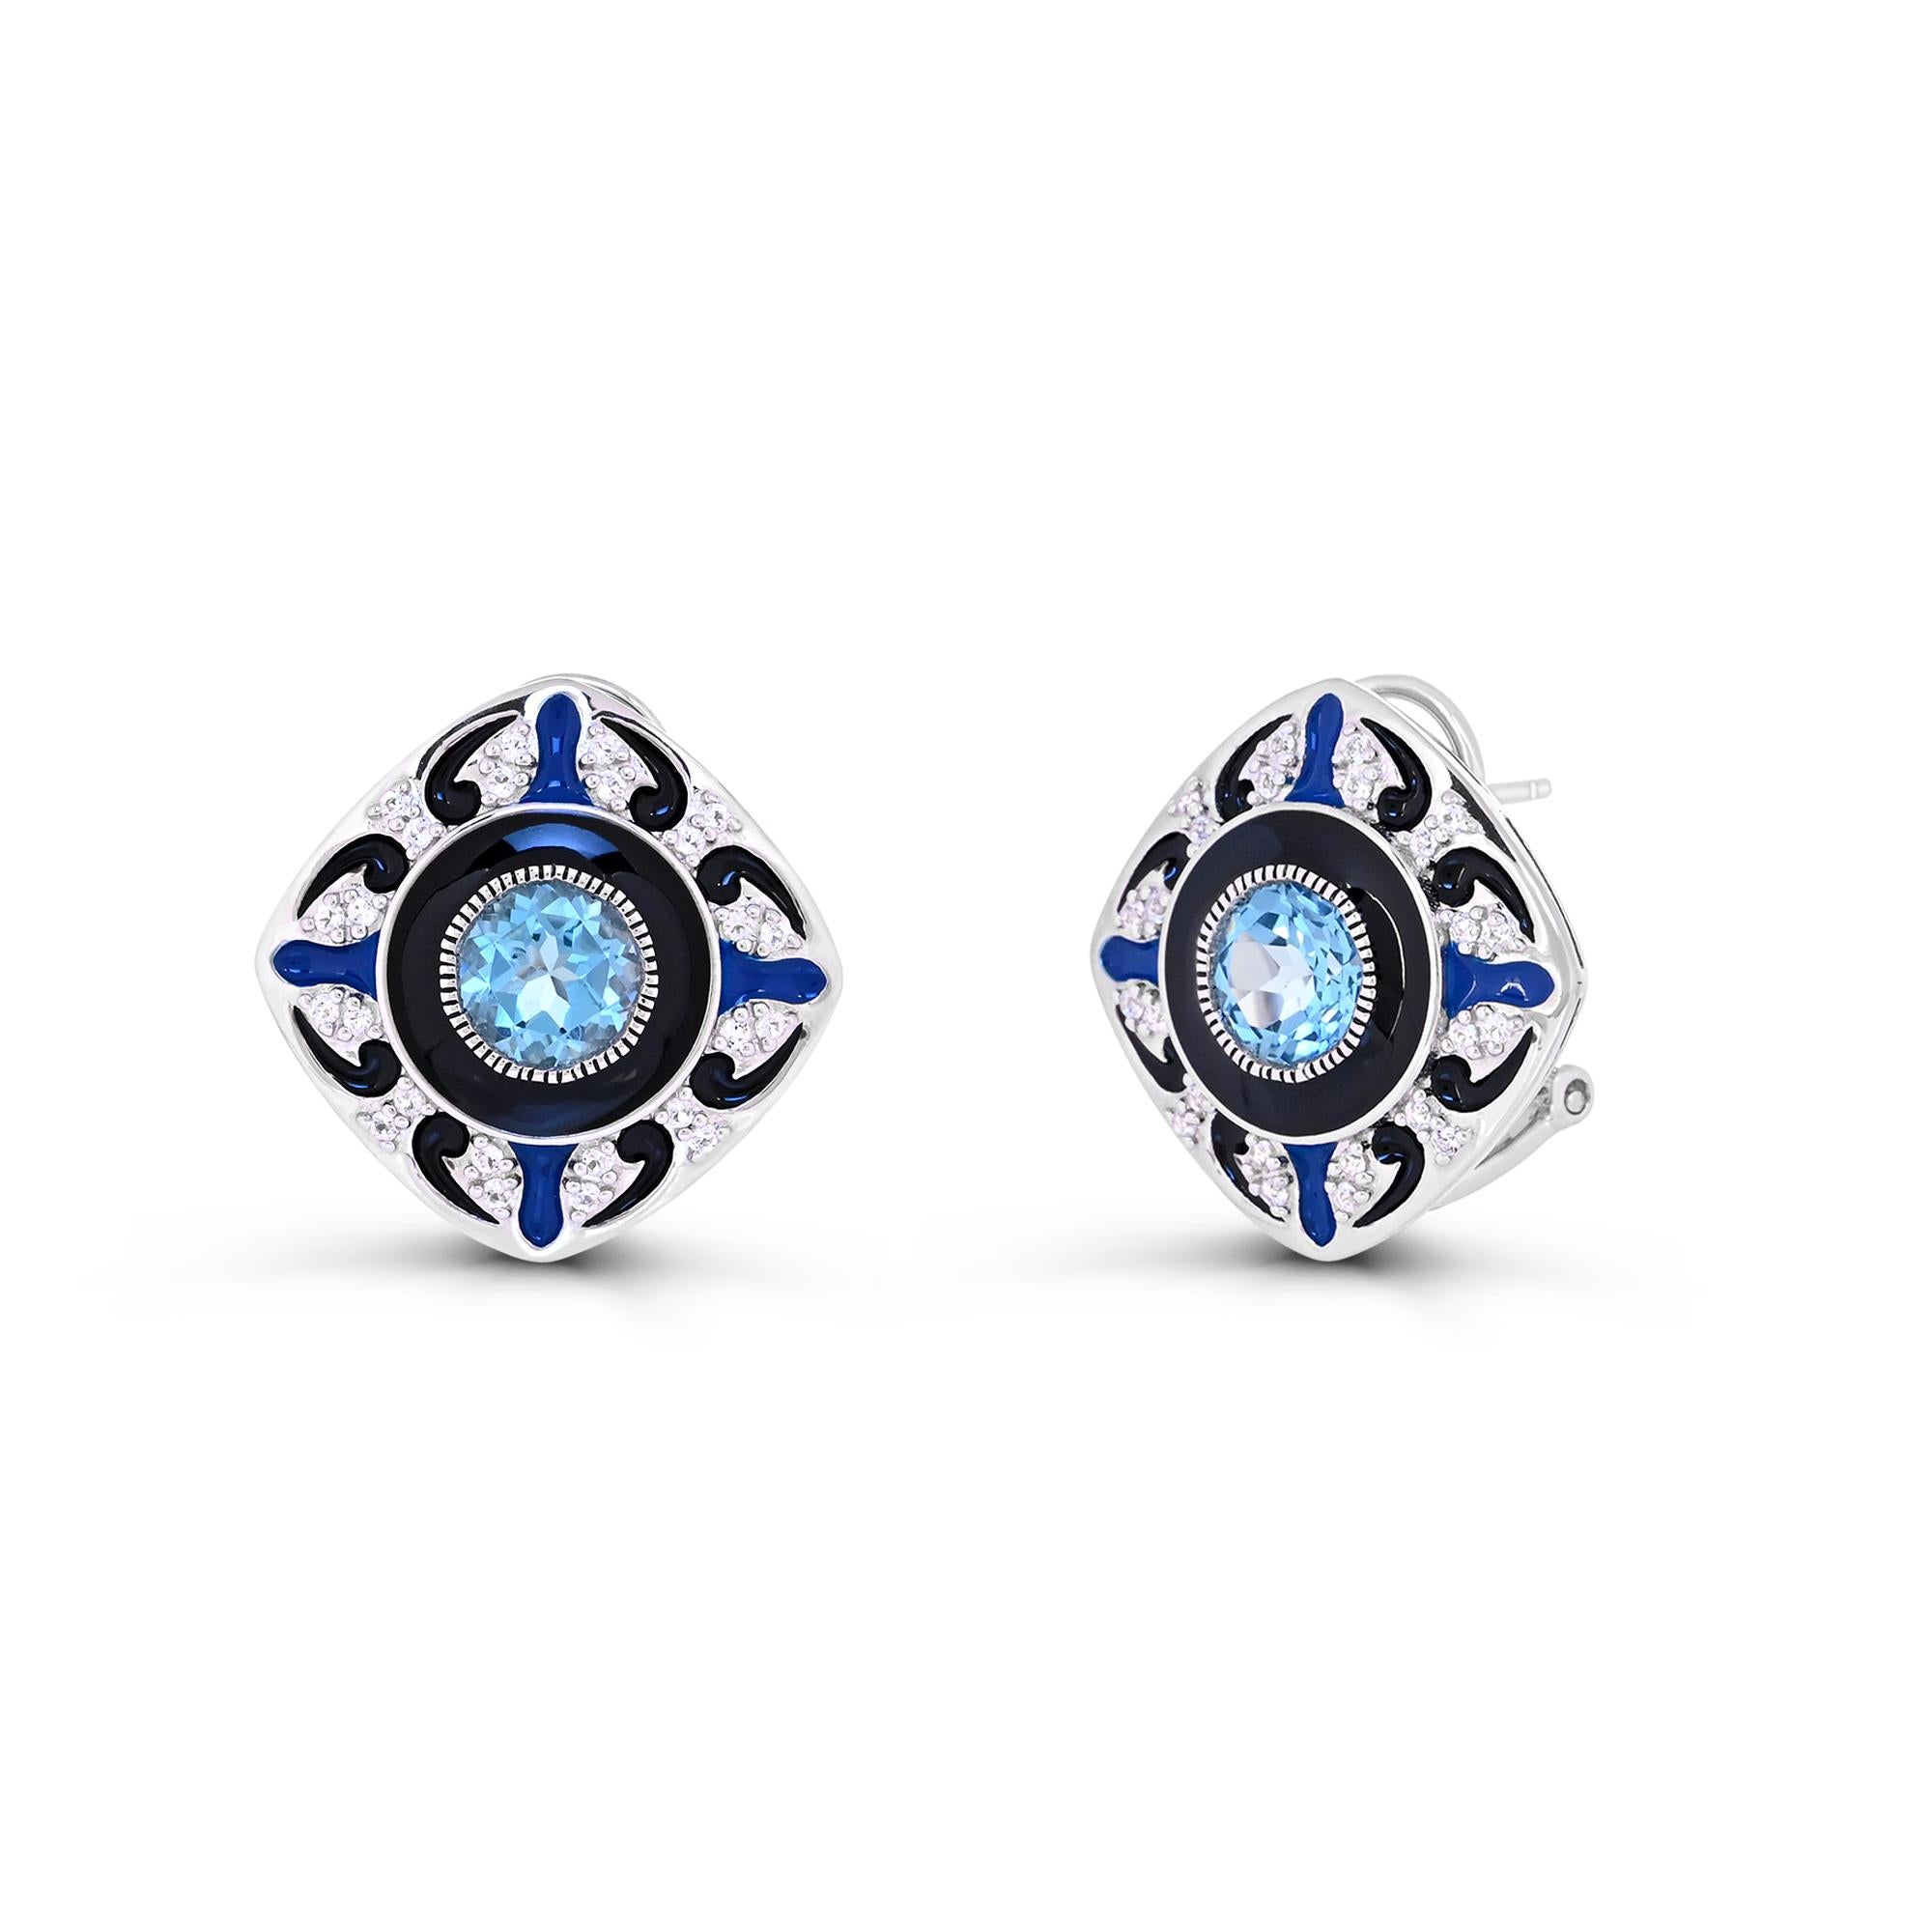 Round Cut 3-1/2 ct. Blue and White Topaz with Enameled Latch Sterling Silver Earrings For Sale